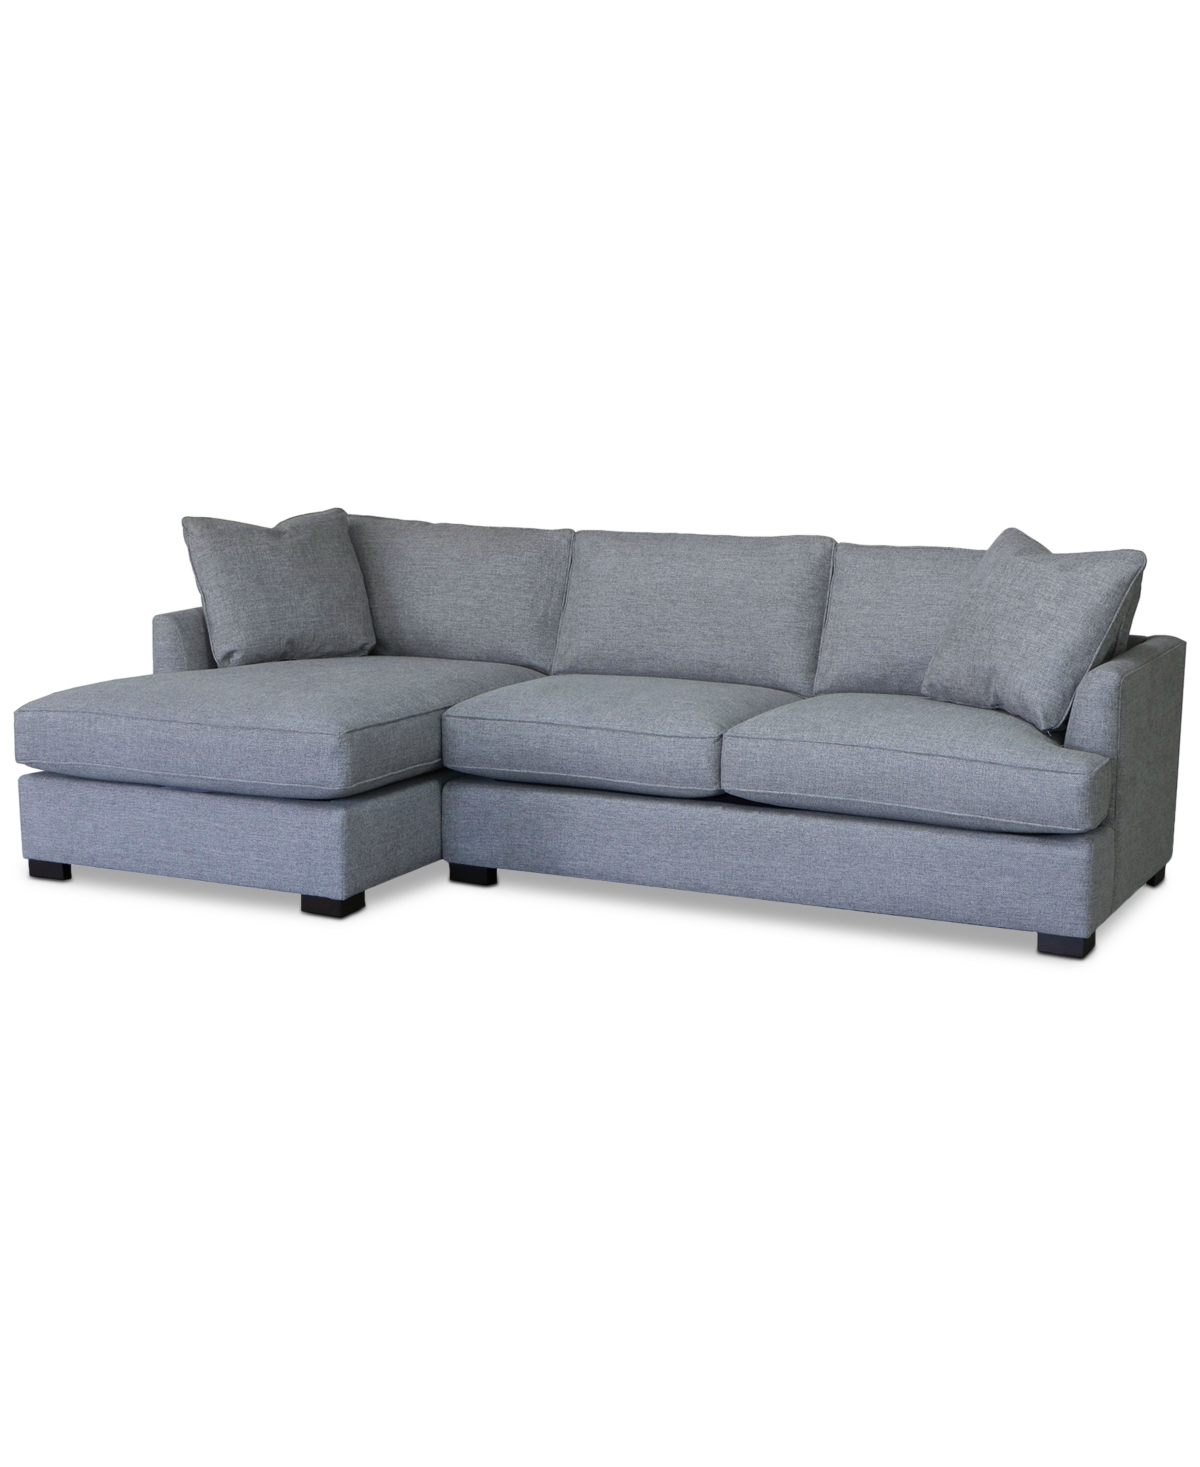 Furniture Nightford 111" 2-pc. Fabric Chaise Sectional, Created For Macy's In Granite